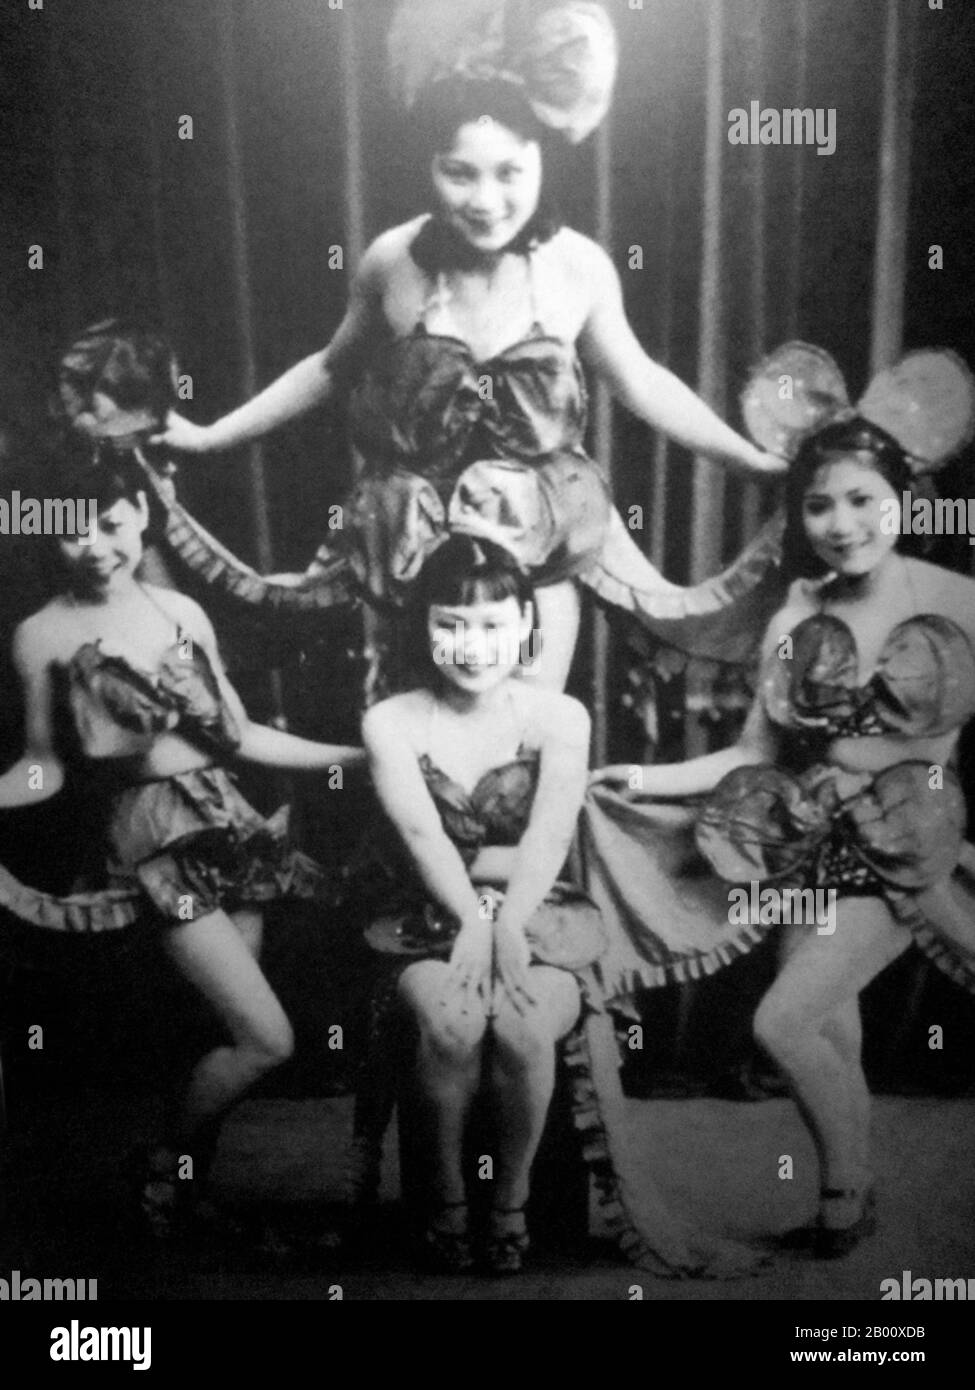 Singapore: Early showgirls, probably c. 1925.  Singapore came under British influence in 1819 when the [British] East India Company opened a trading port there with permission from the Sultanate of Johor. The British obtained sovereignty over the island in 1824 and Singapore became one of the British Straits Settlements in 1826. Occupied by the Japanese in World War II, Singapore declared independence, uniting with other former British territories to form Malaysia in 1963, although it was separated from Malaysia two years later. Stock Photo